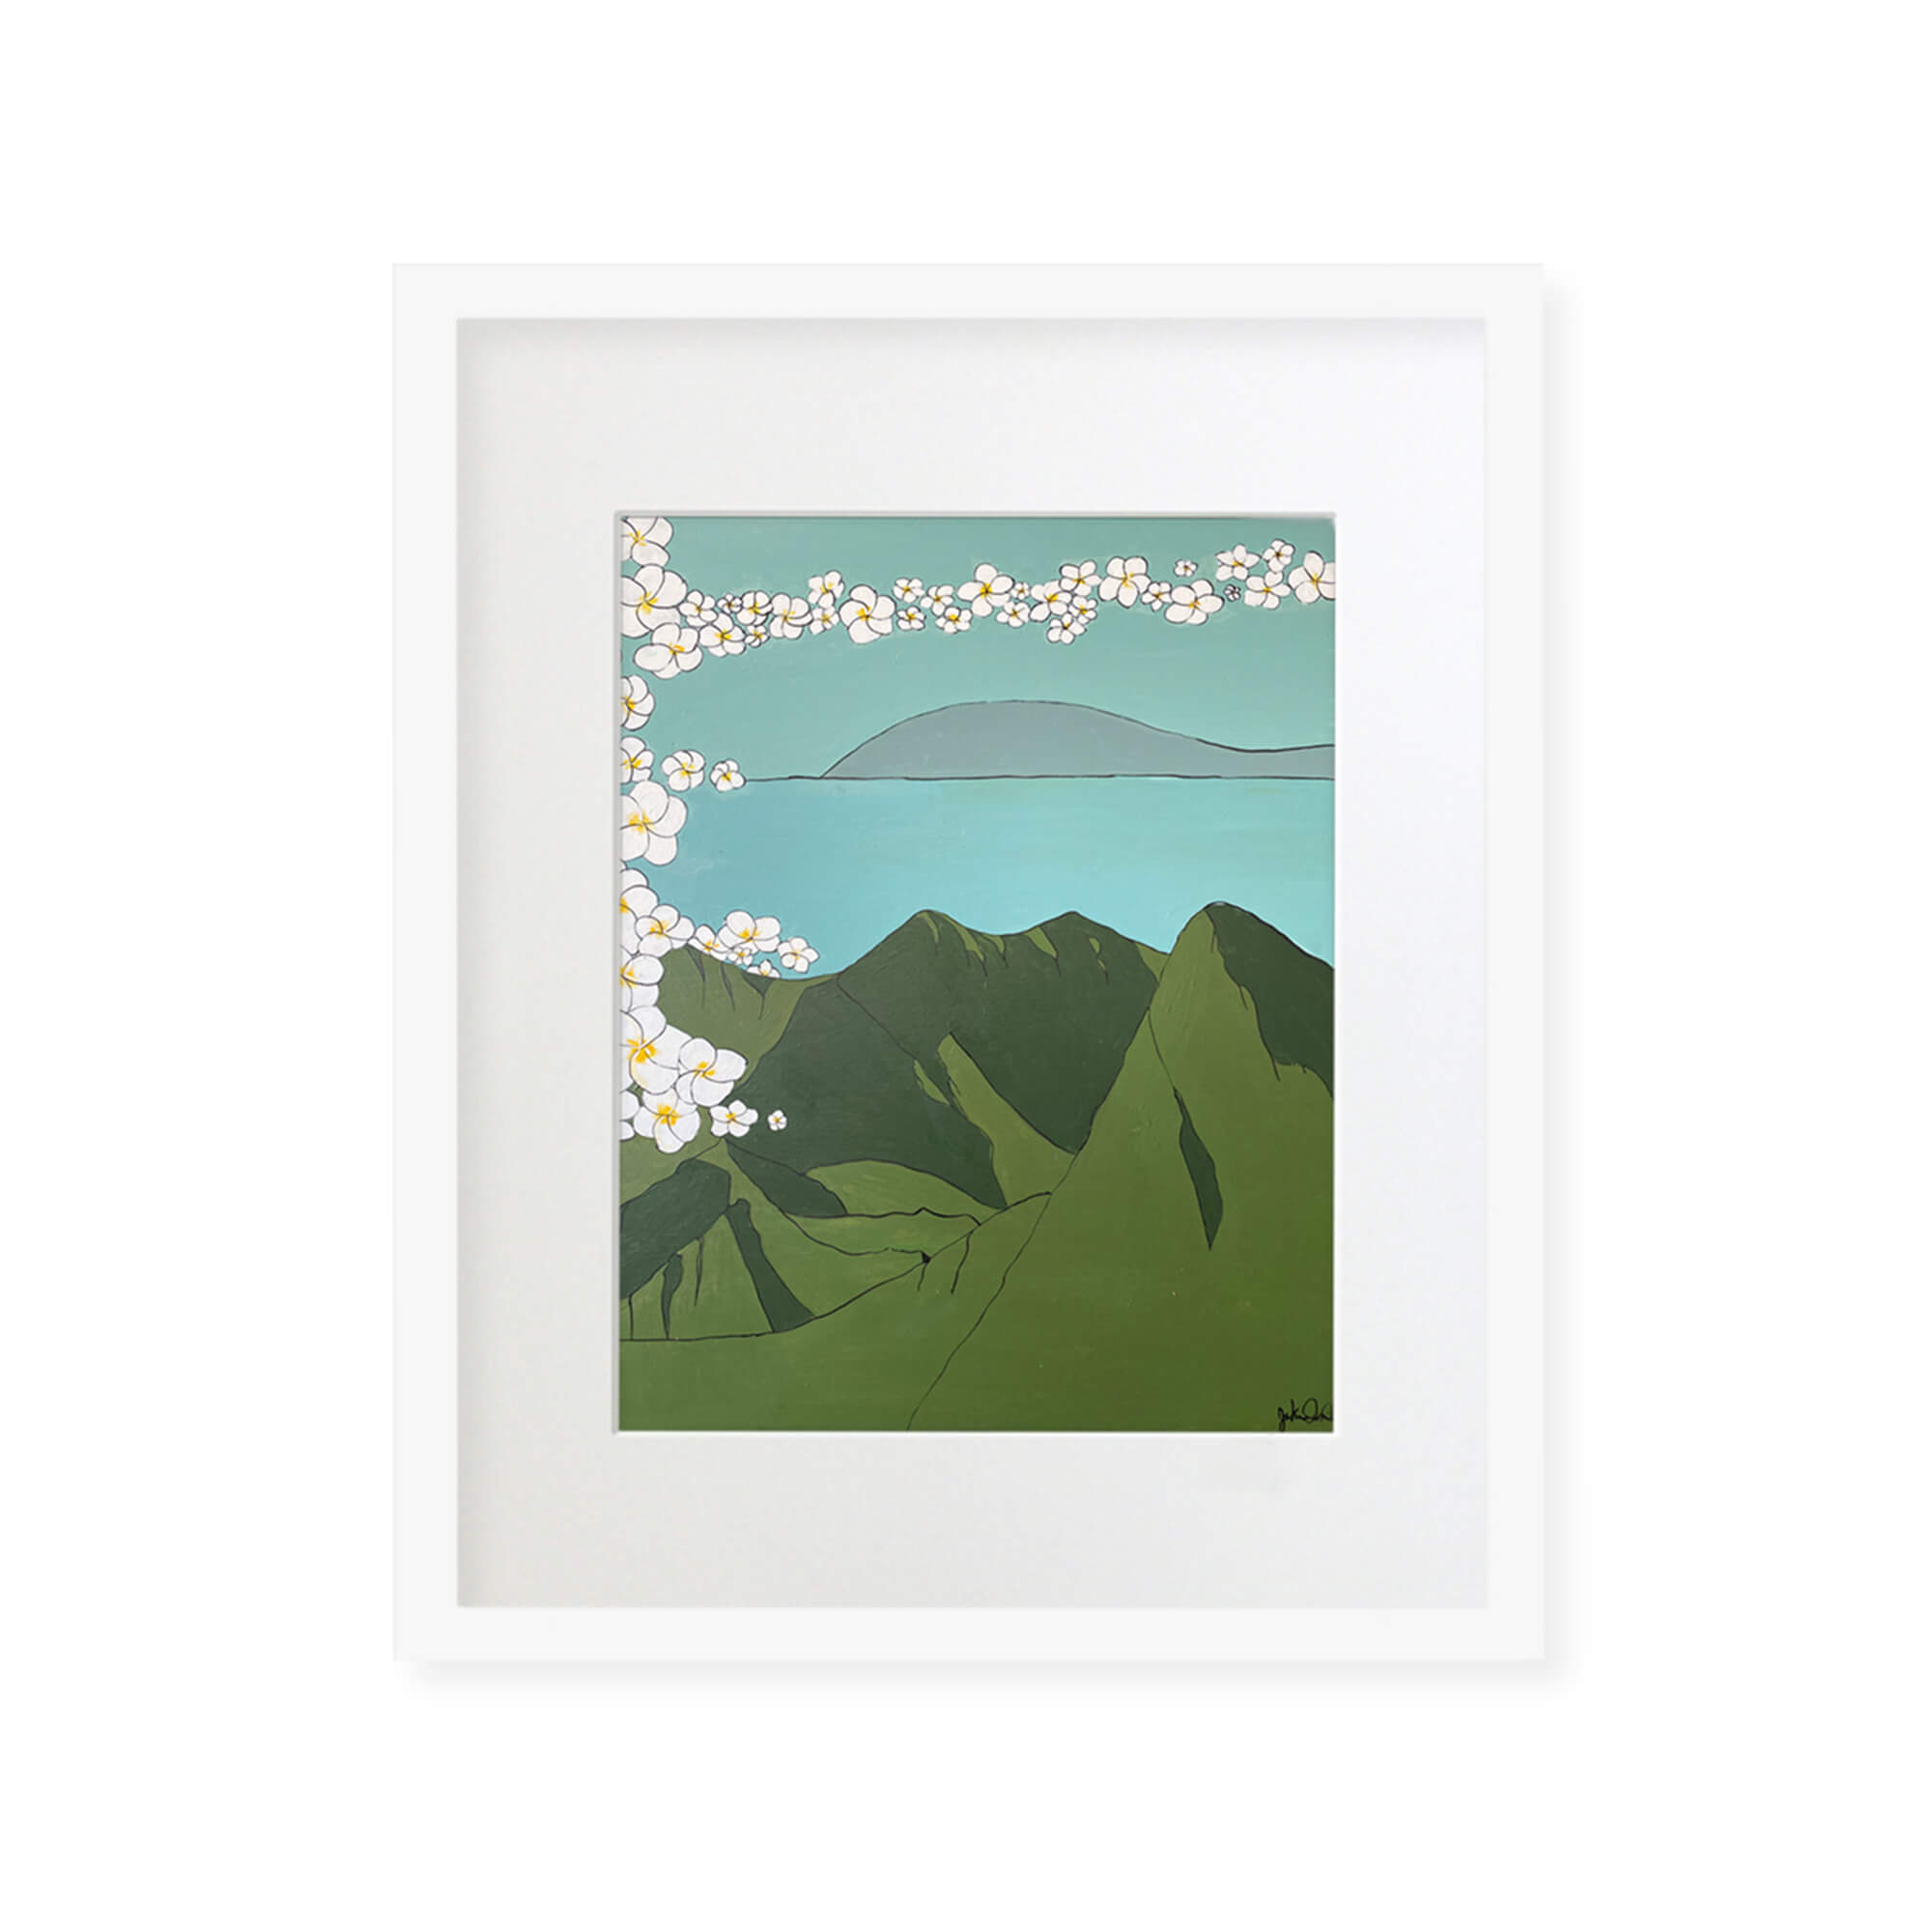 A framed matted art print featuring the beautiful mountains of Hawaii with plumeria flowers by Hawaii artist Jackie Eitel